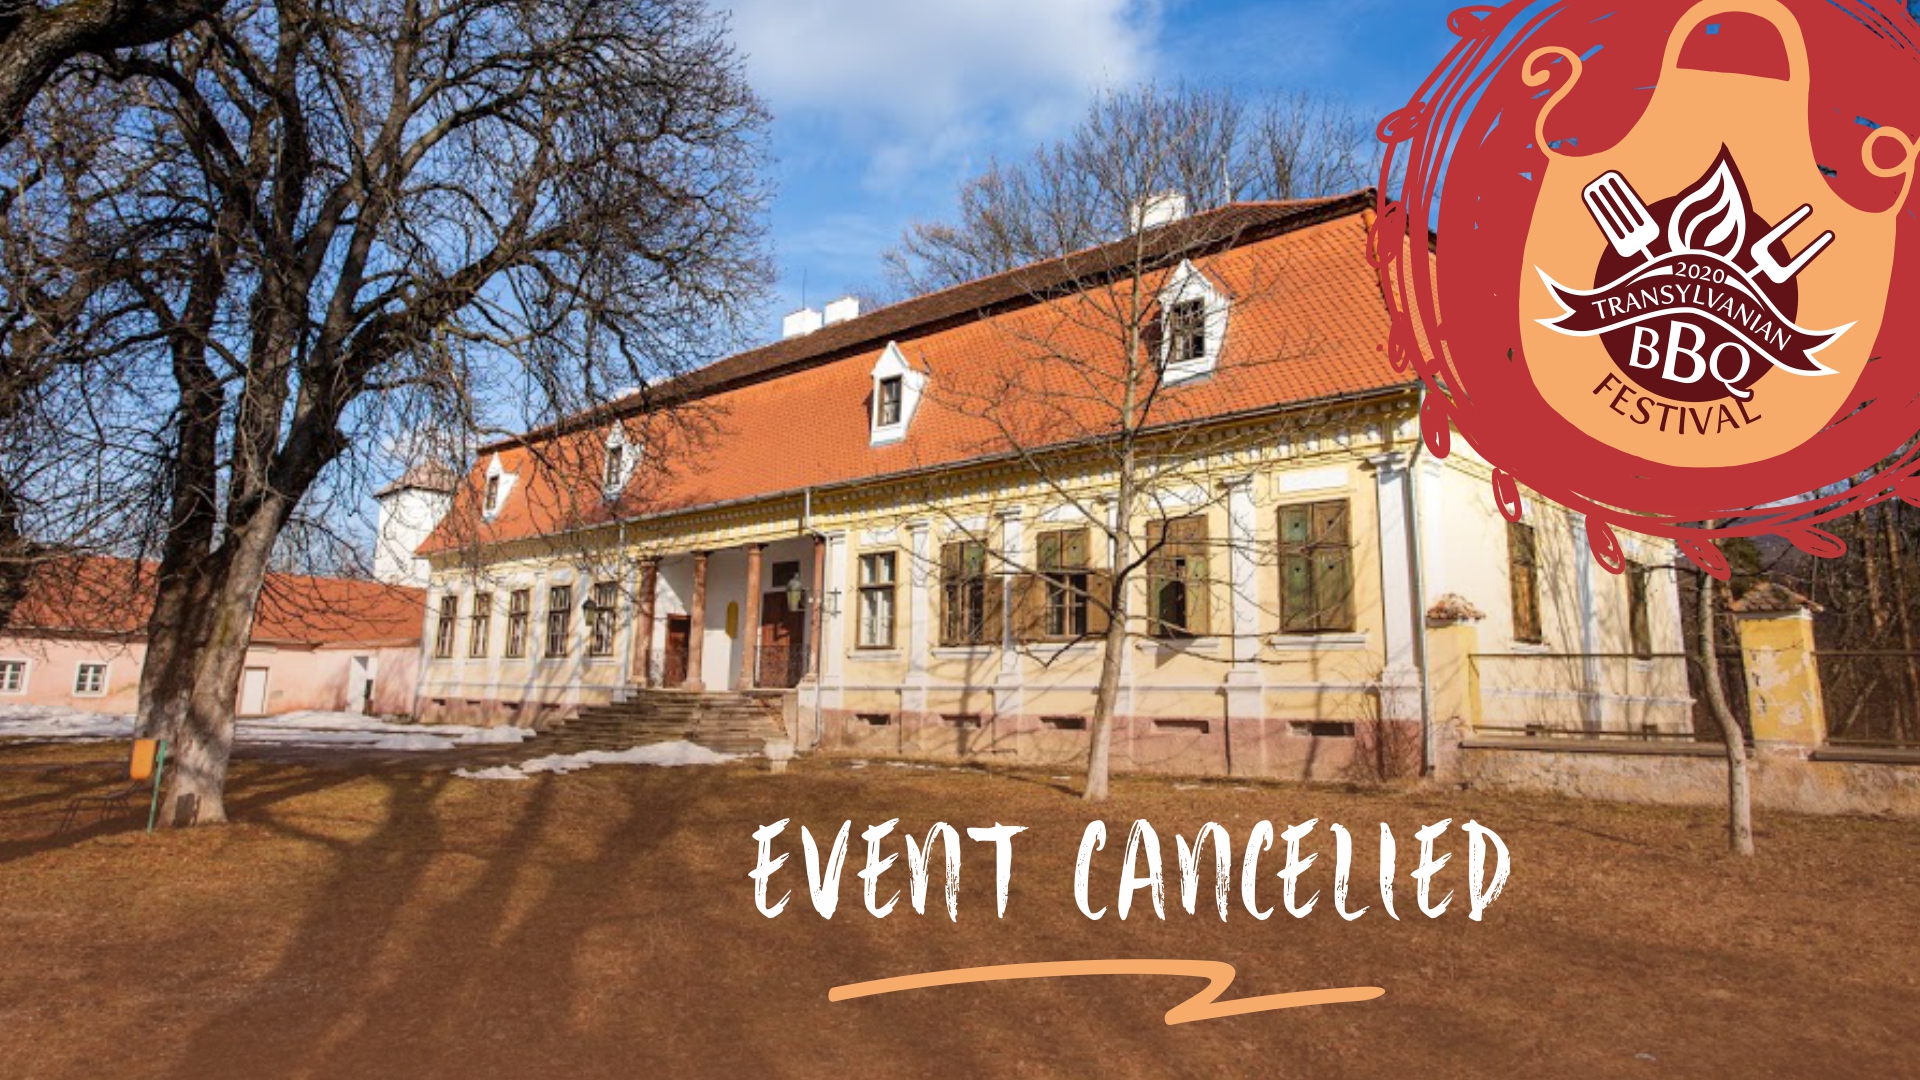 The Transylvanian BBQ Festival is cancelled